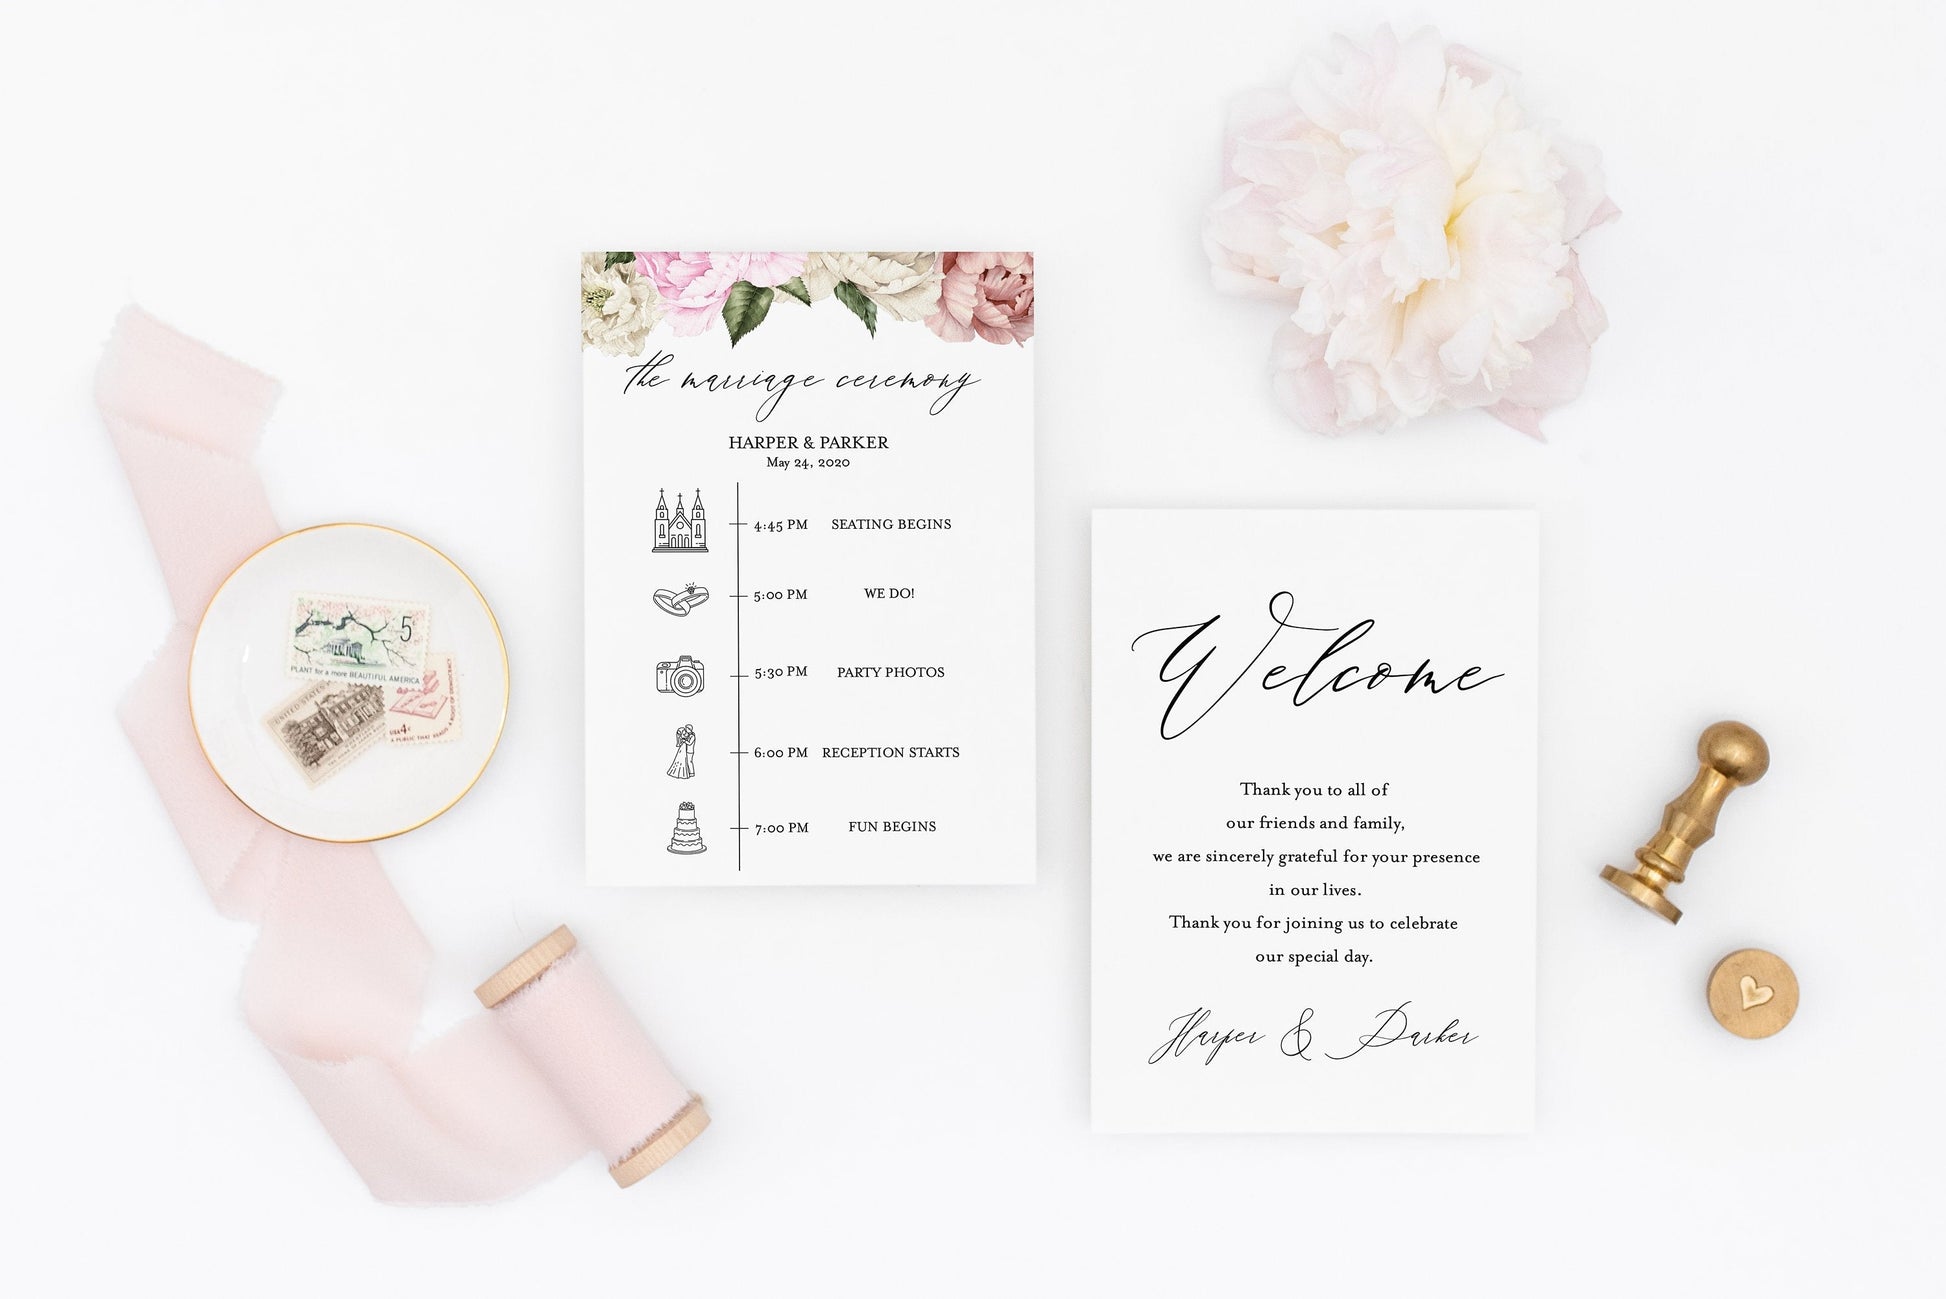 Printable Floral Wedding Itinerary Template Card Timeline Welcome 100% editable Templett Floral - Harper MENU|PROGRAMS|TIMELINE SAVVY PAPER CO